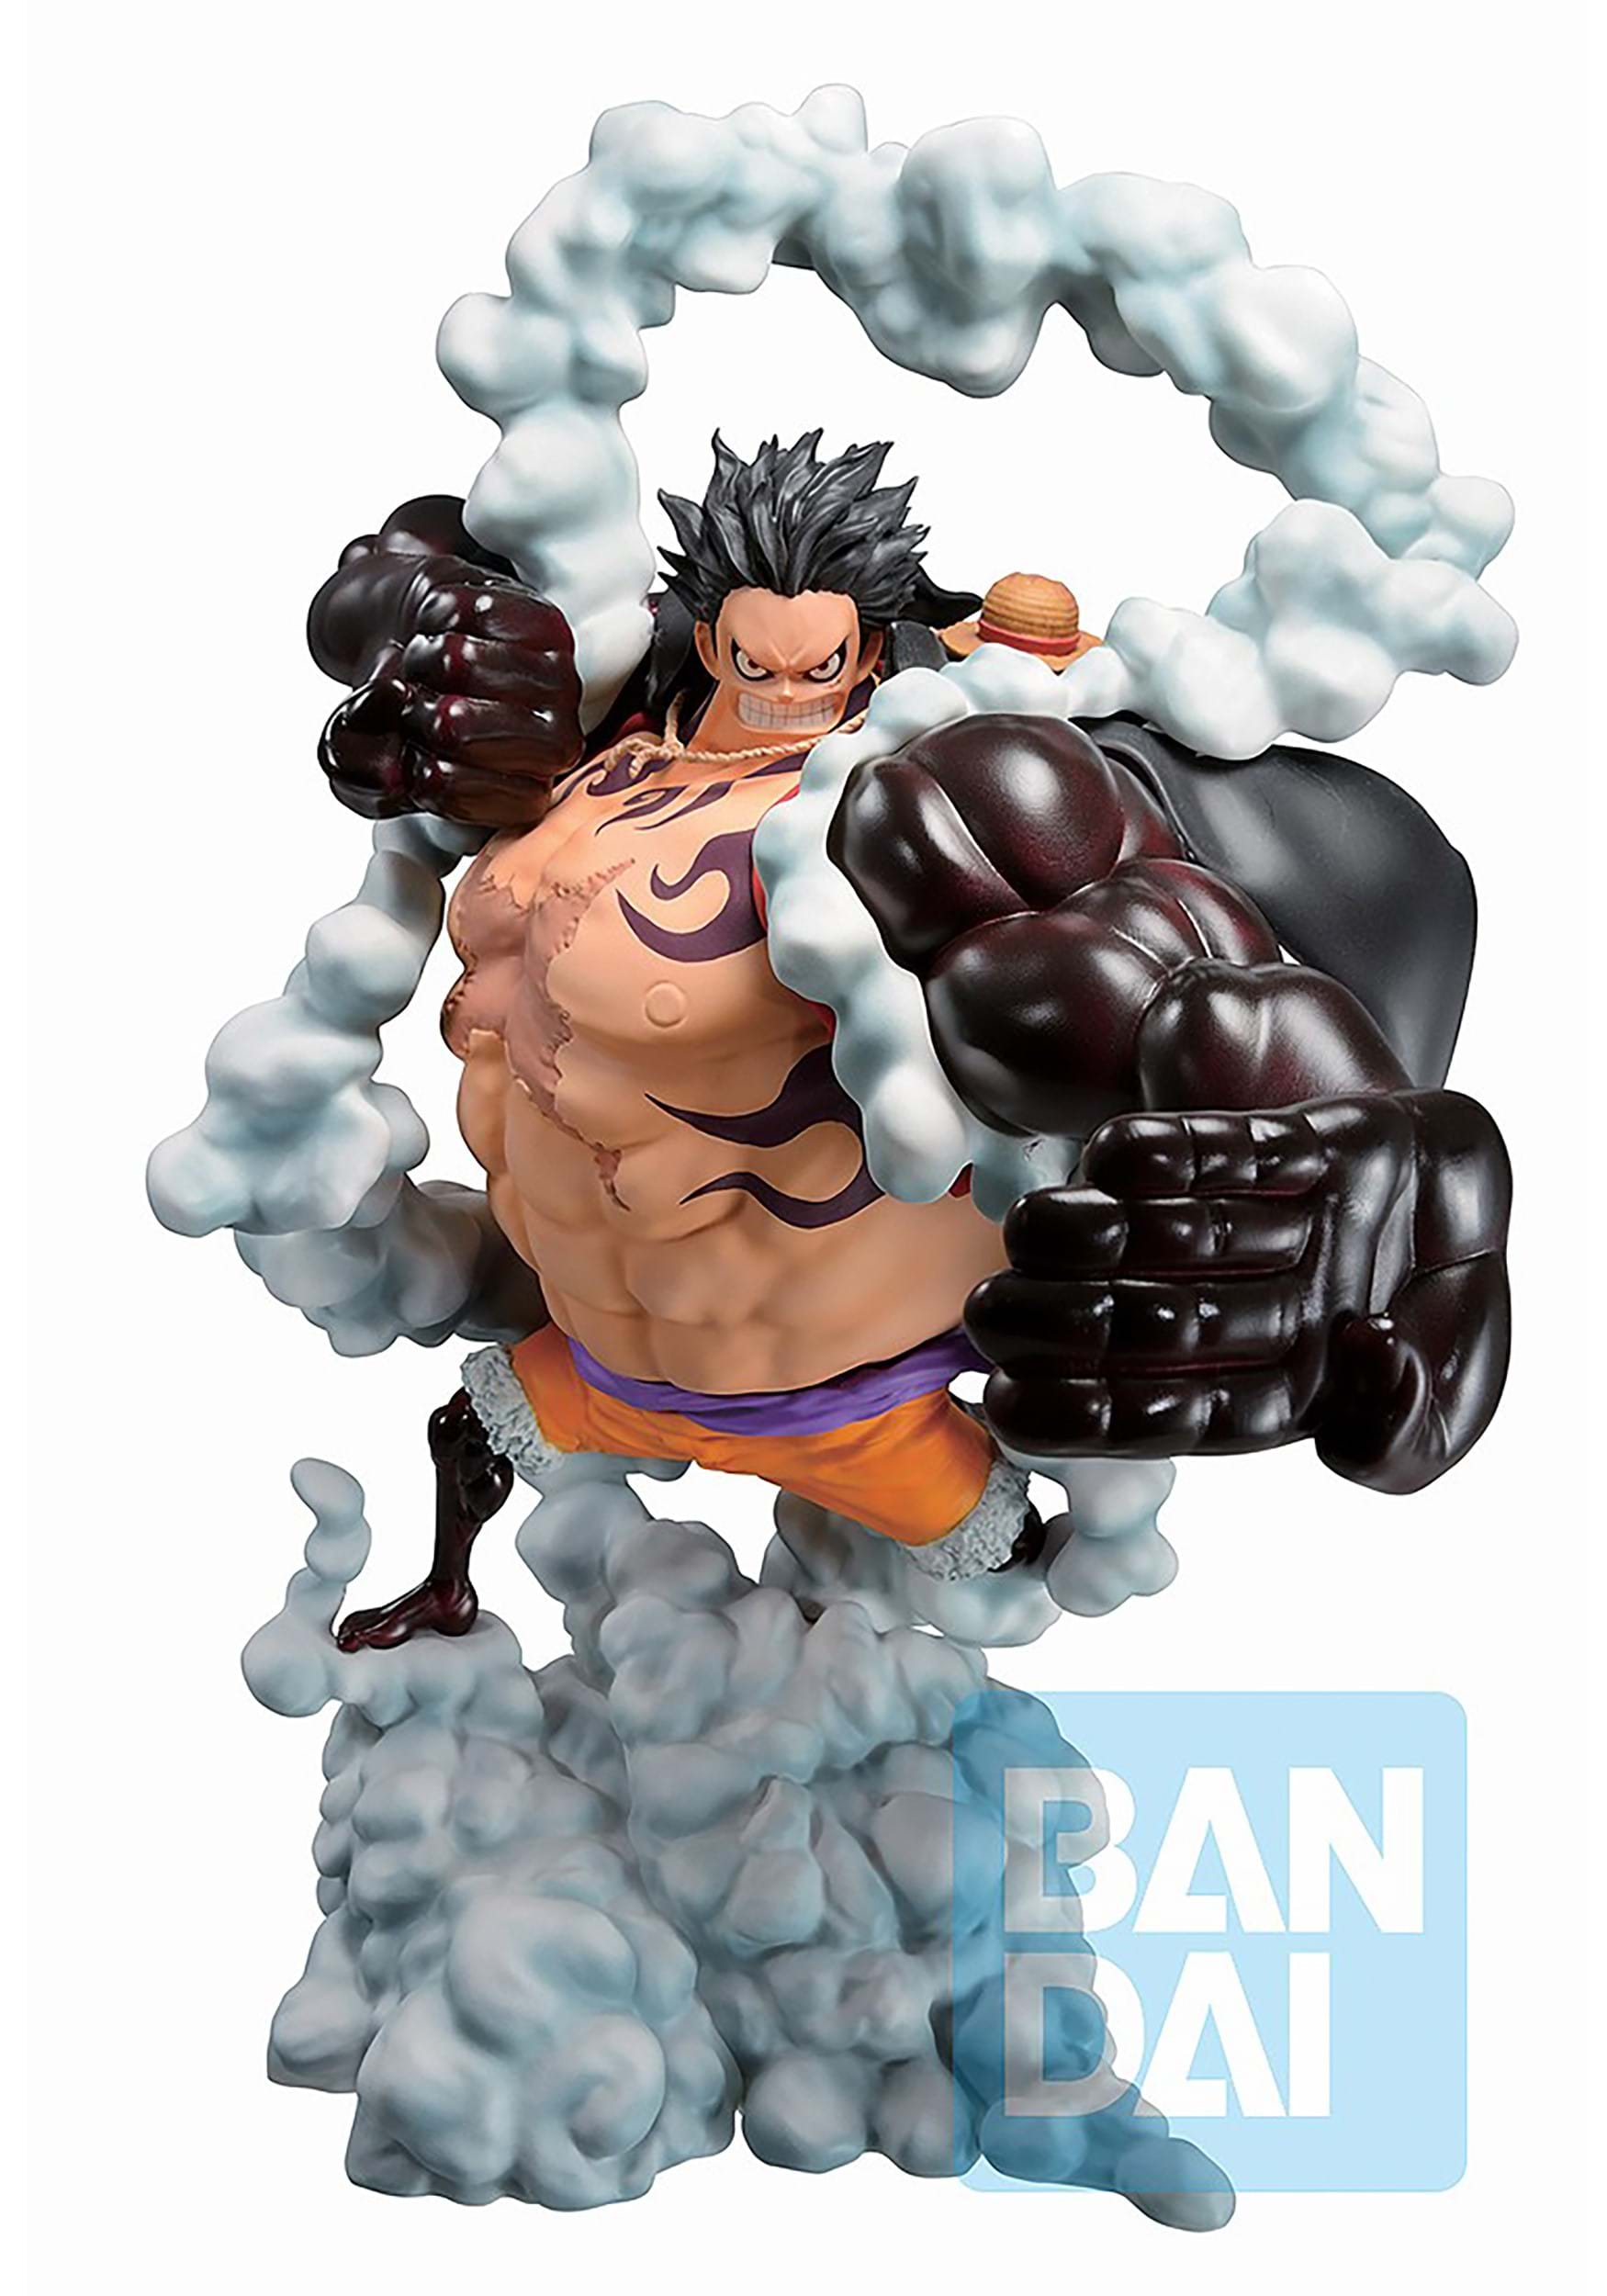 One Piece Monkey D. Luffy Wano Country Third Act Ichiban Statue